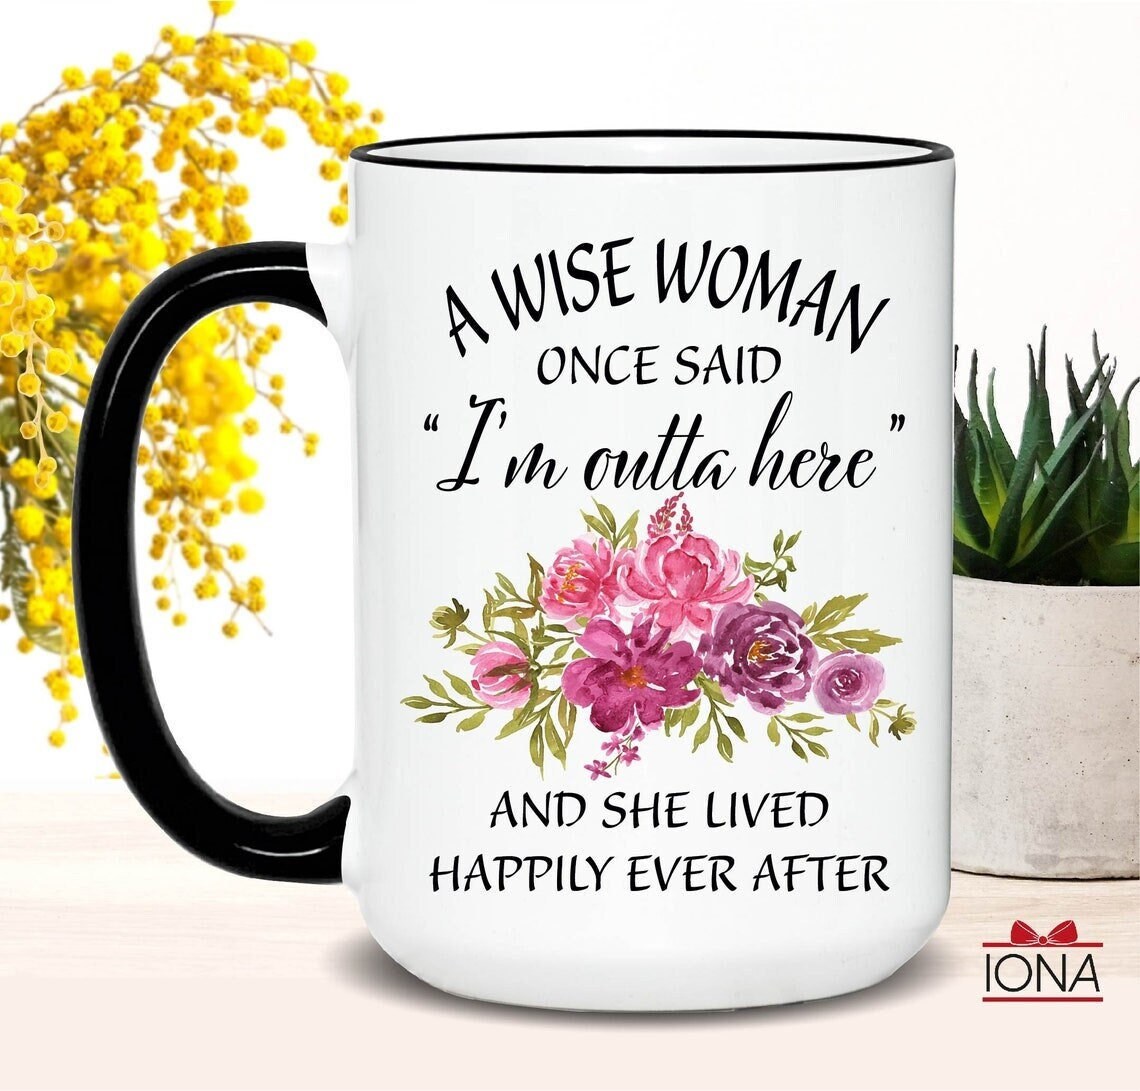 Retirement Gifts for Women, A Wise Woman Once Said, Funny Retirement Gift for Women from Coworkers, Retirement Coffee Mug, Happy Retirement